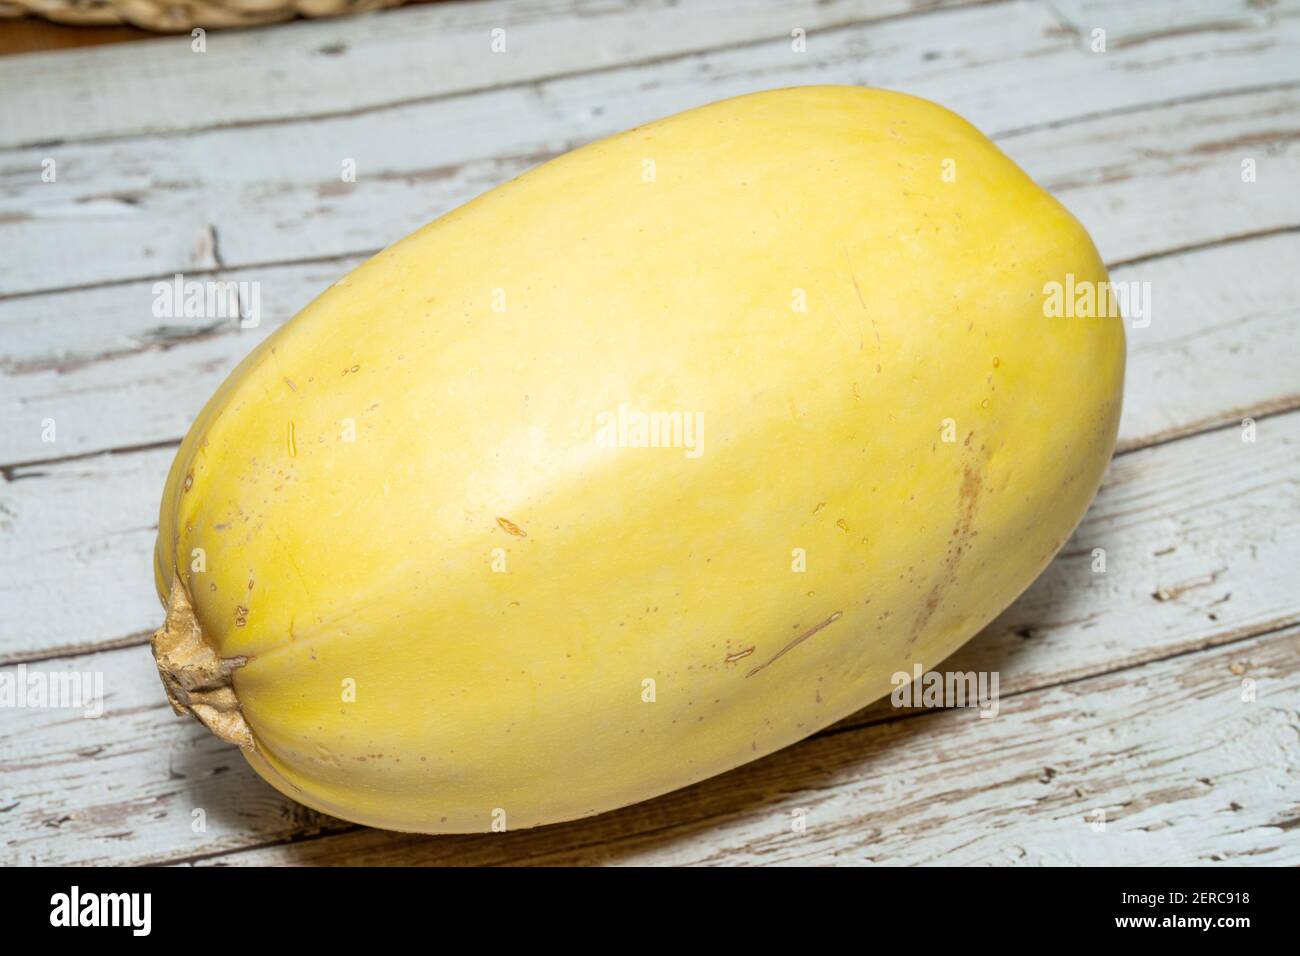 Spaghetti squash or vegetable spaghetti is a group of cultivars of Cucurbita pepo subsp. pepo. They are available in a variety of shapes, sizes, and c Stock Photo